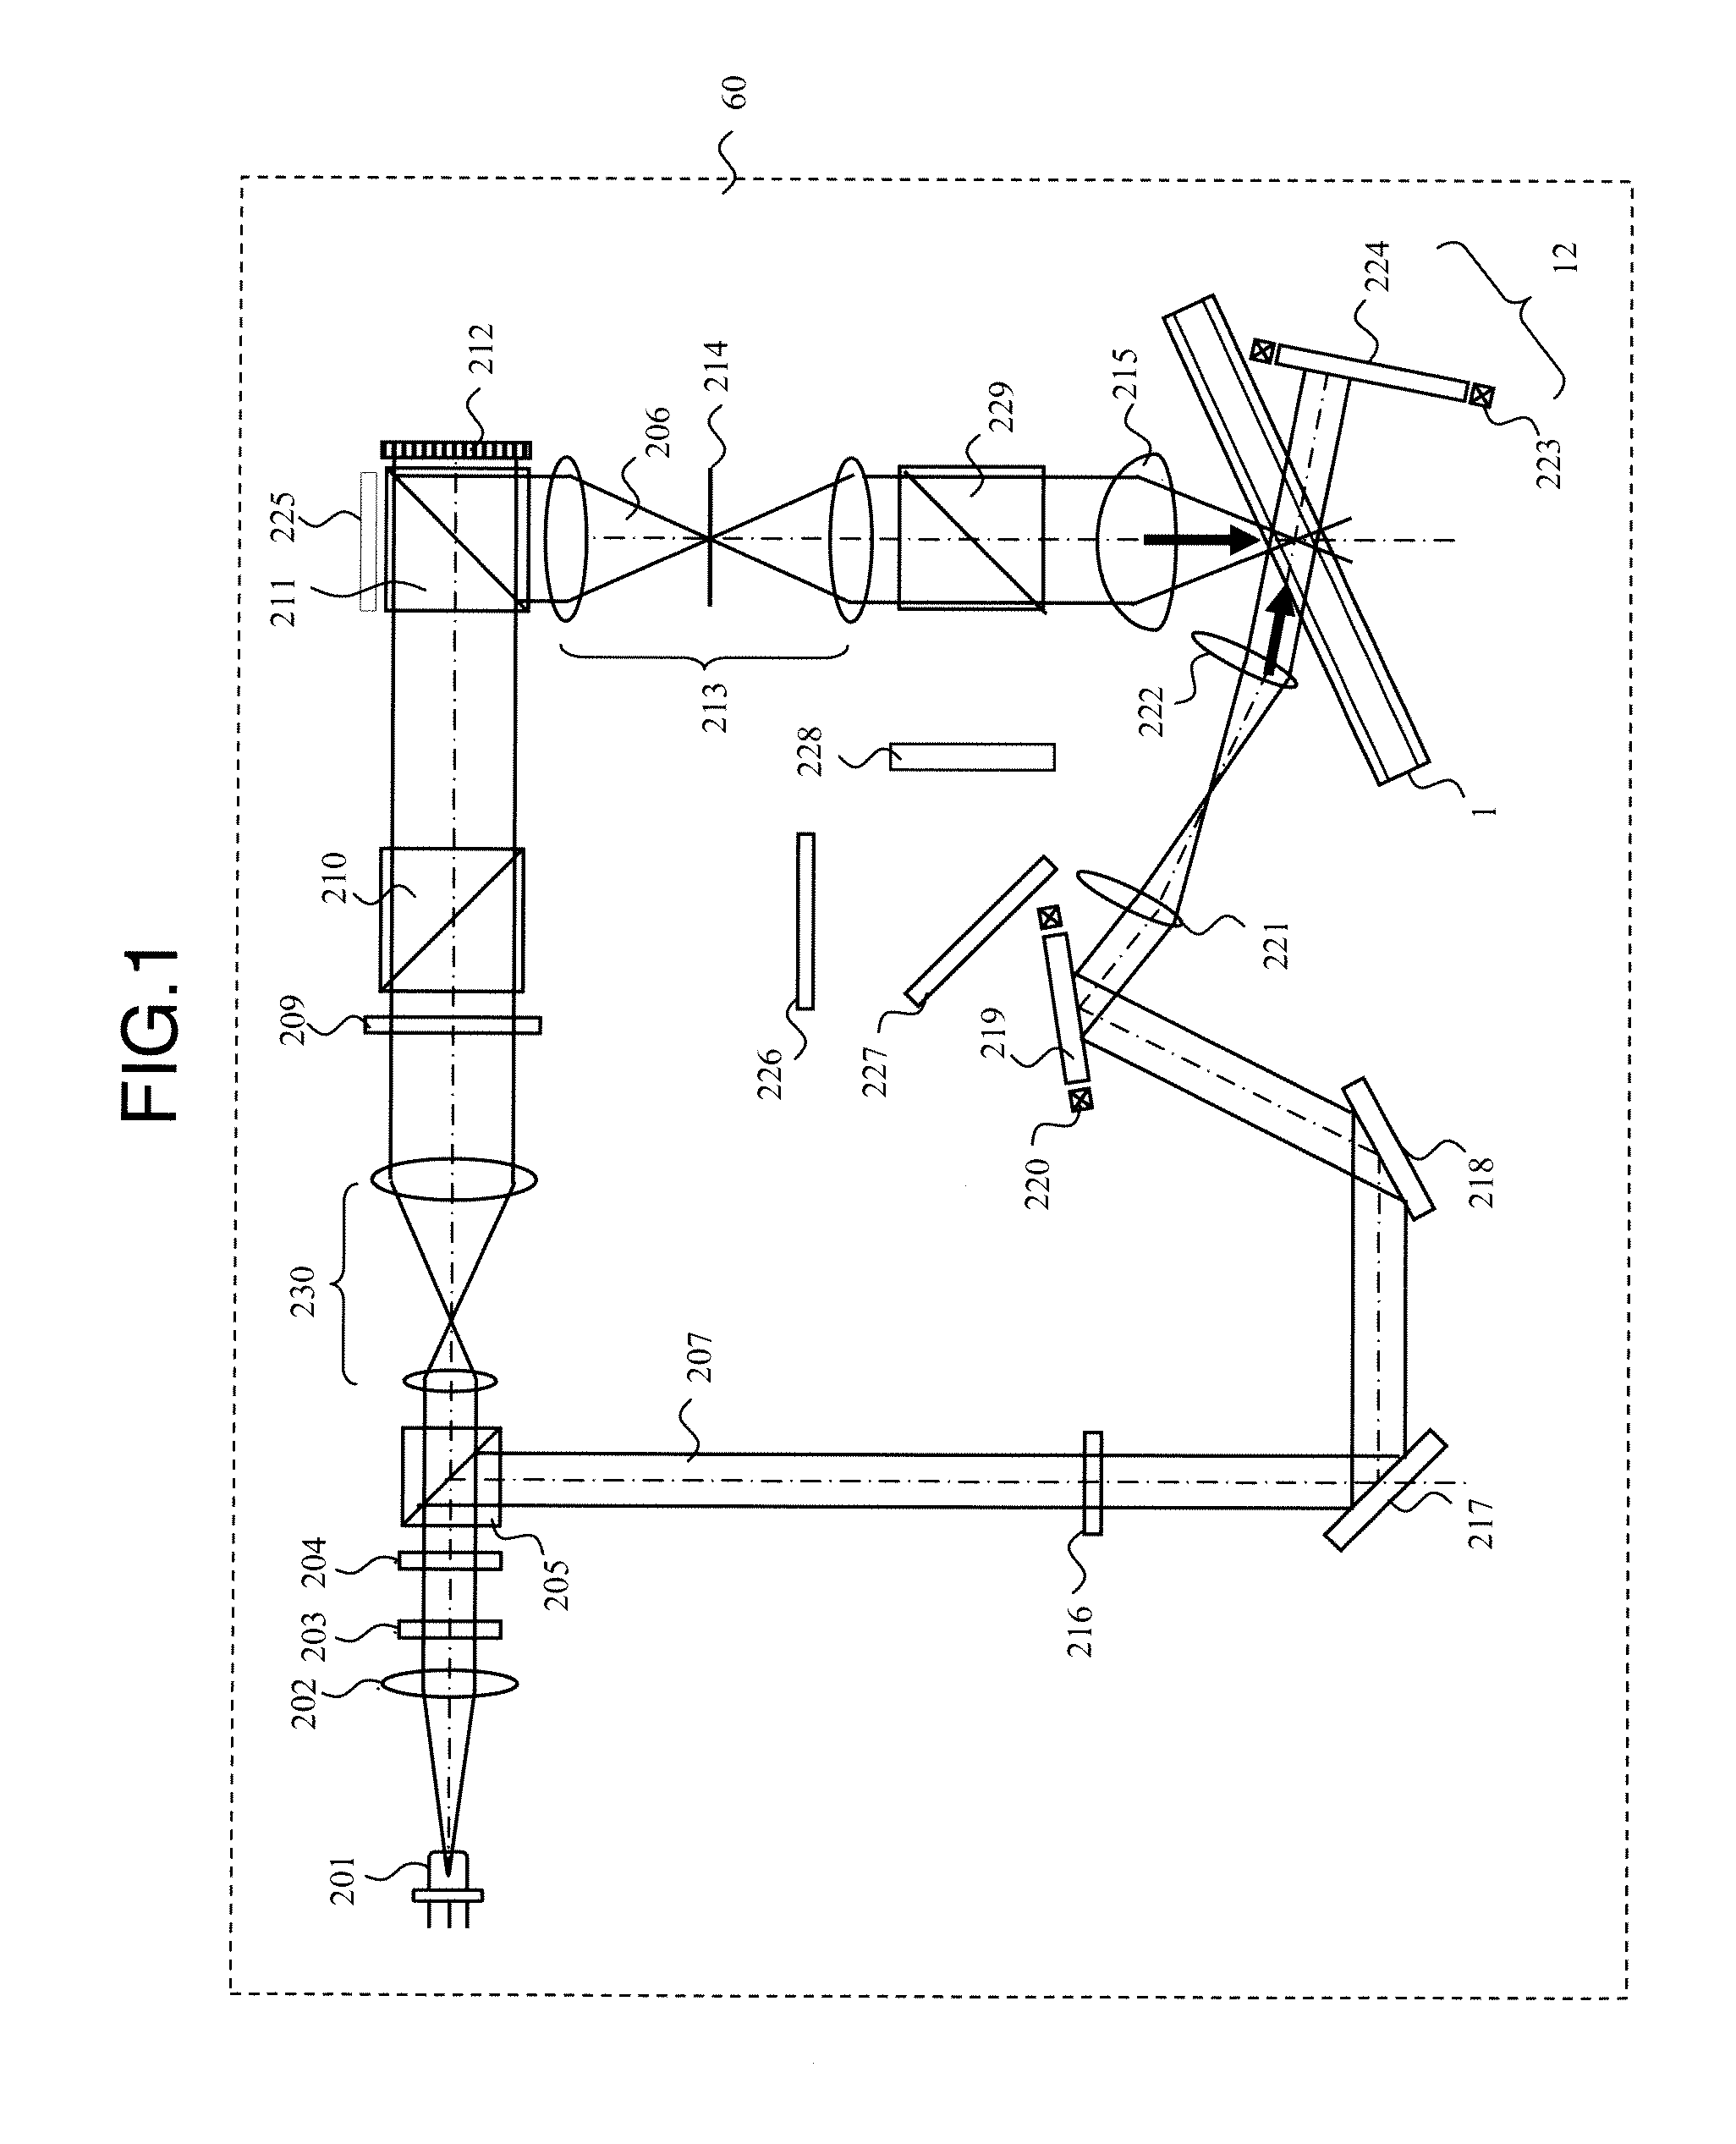 Optical information record/reproduction apparatus and reproduction apparatus